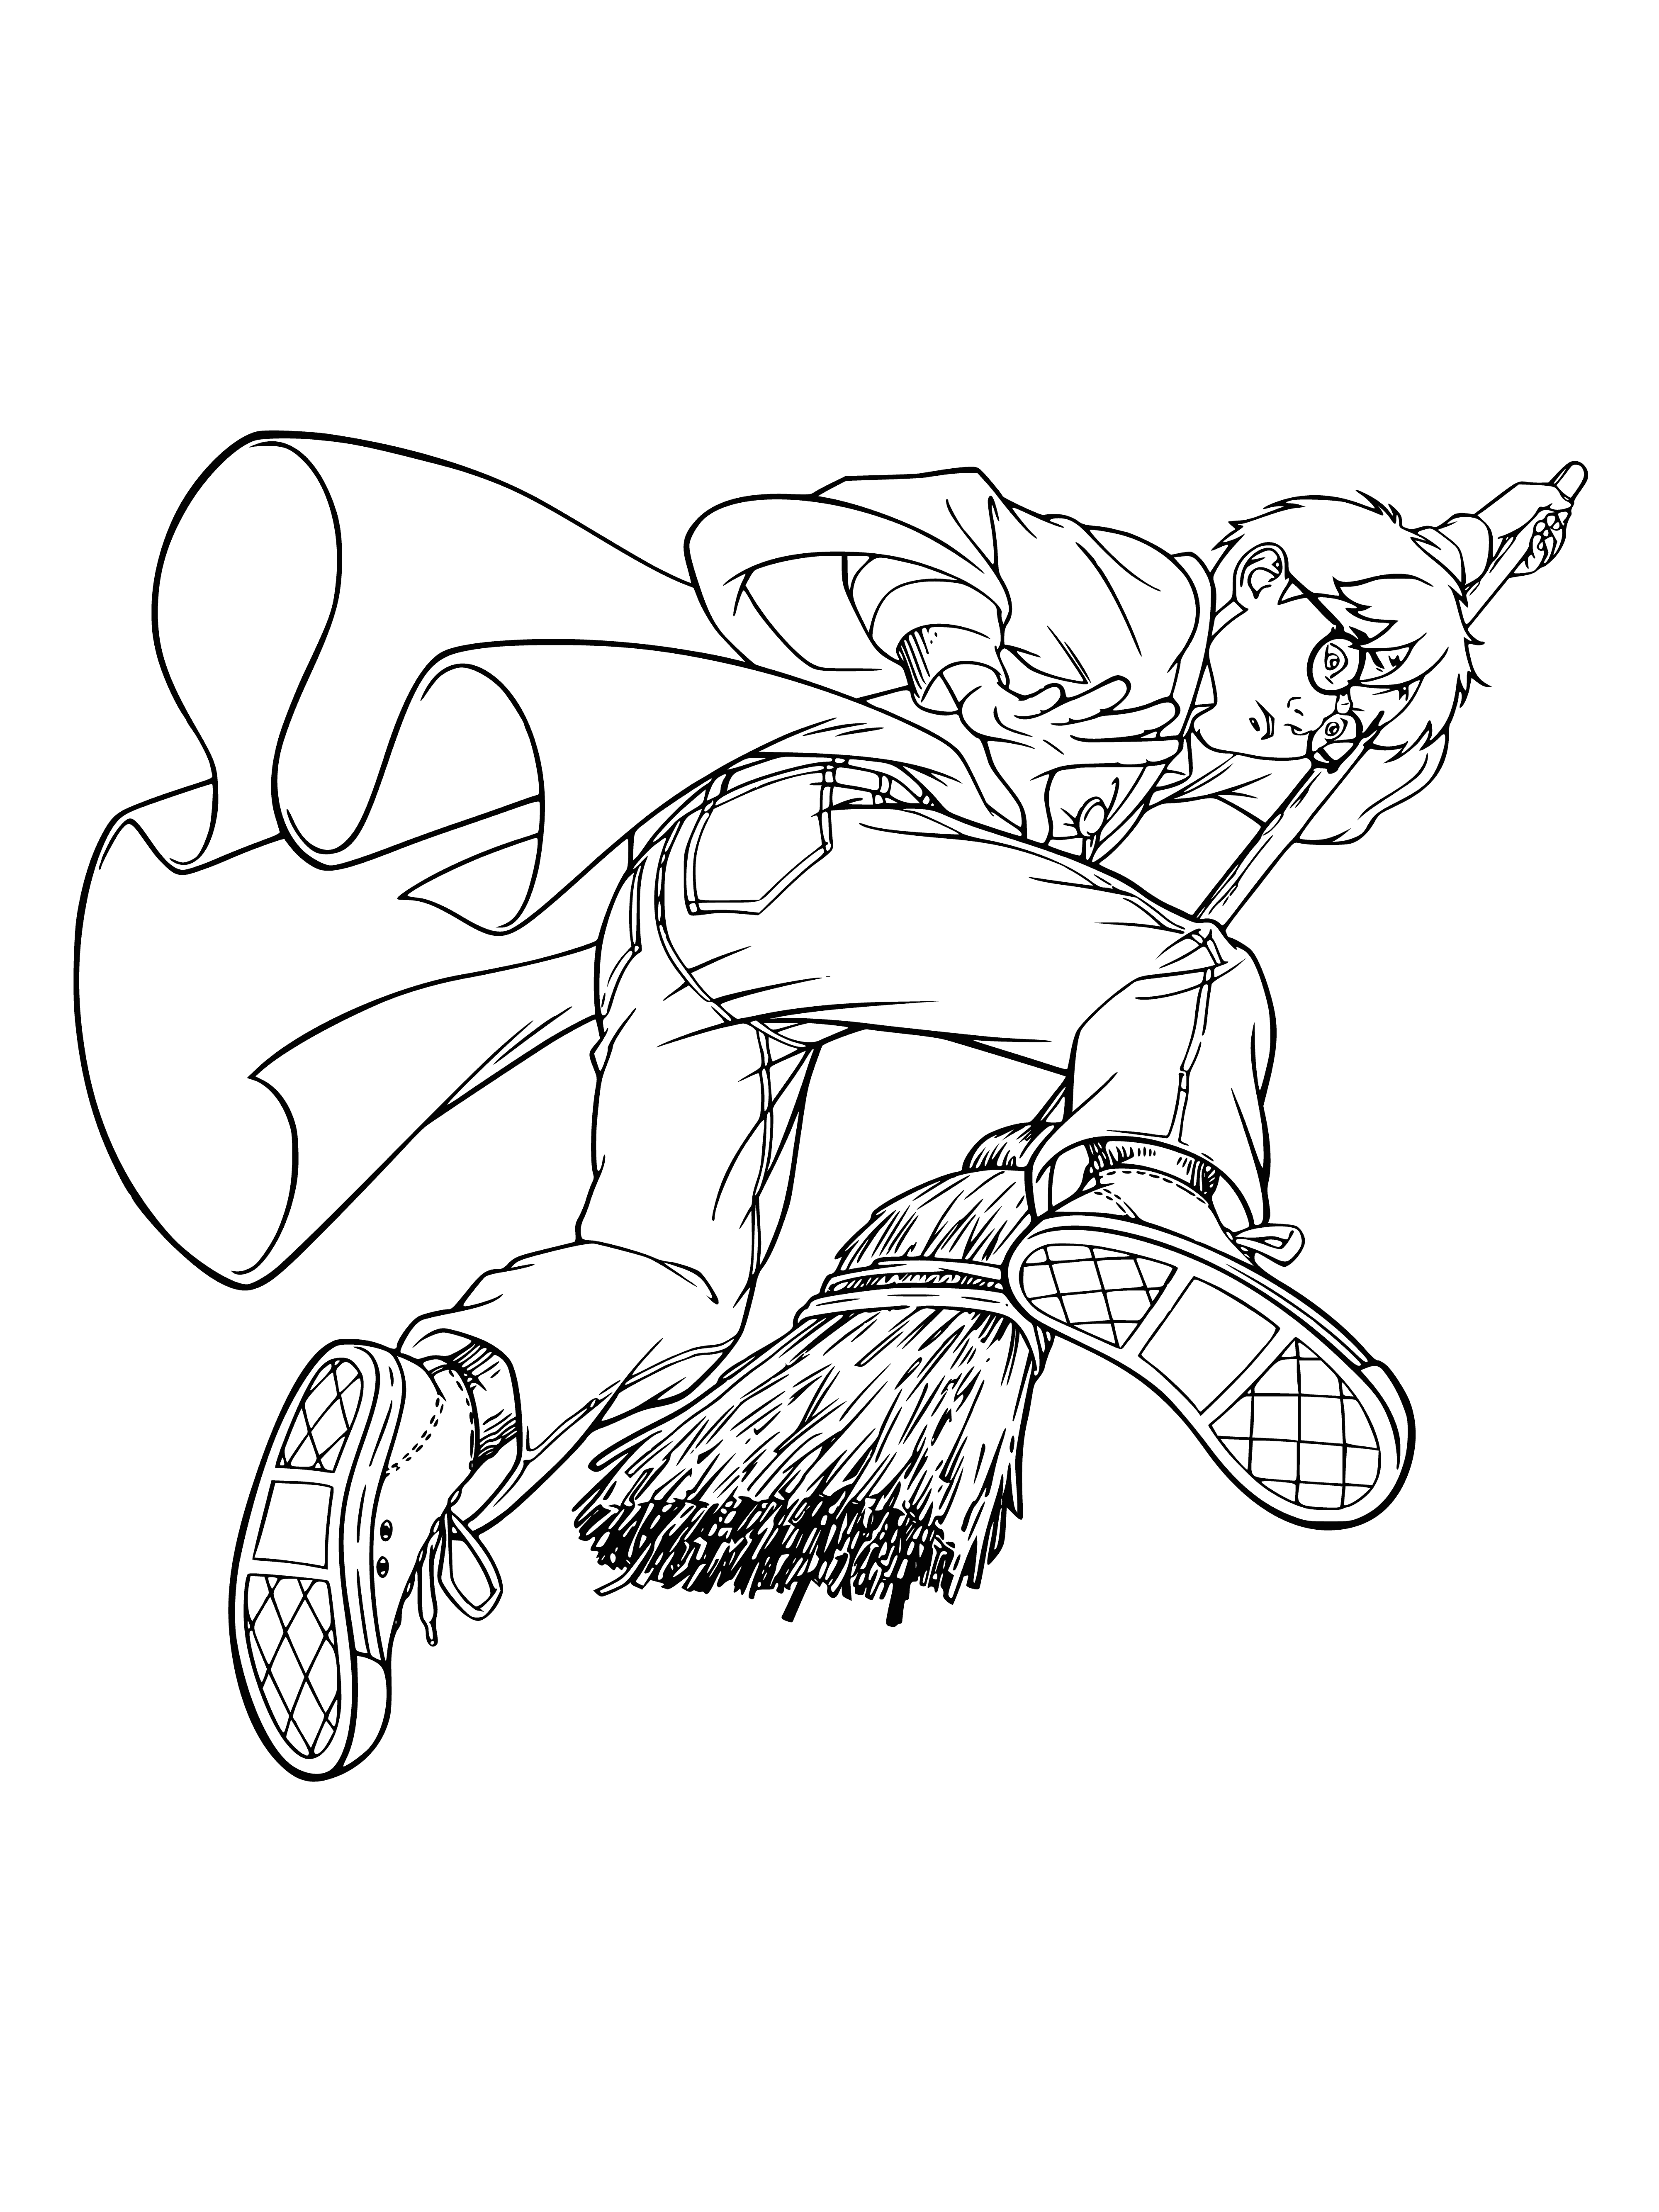 coloring page: Harry desperately grasps at nothing as he falls off his broom midair, glasses askew and hair flying.